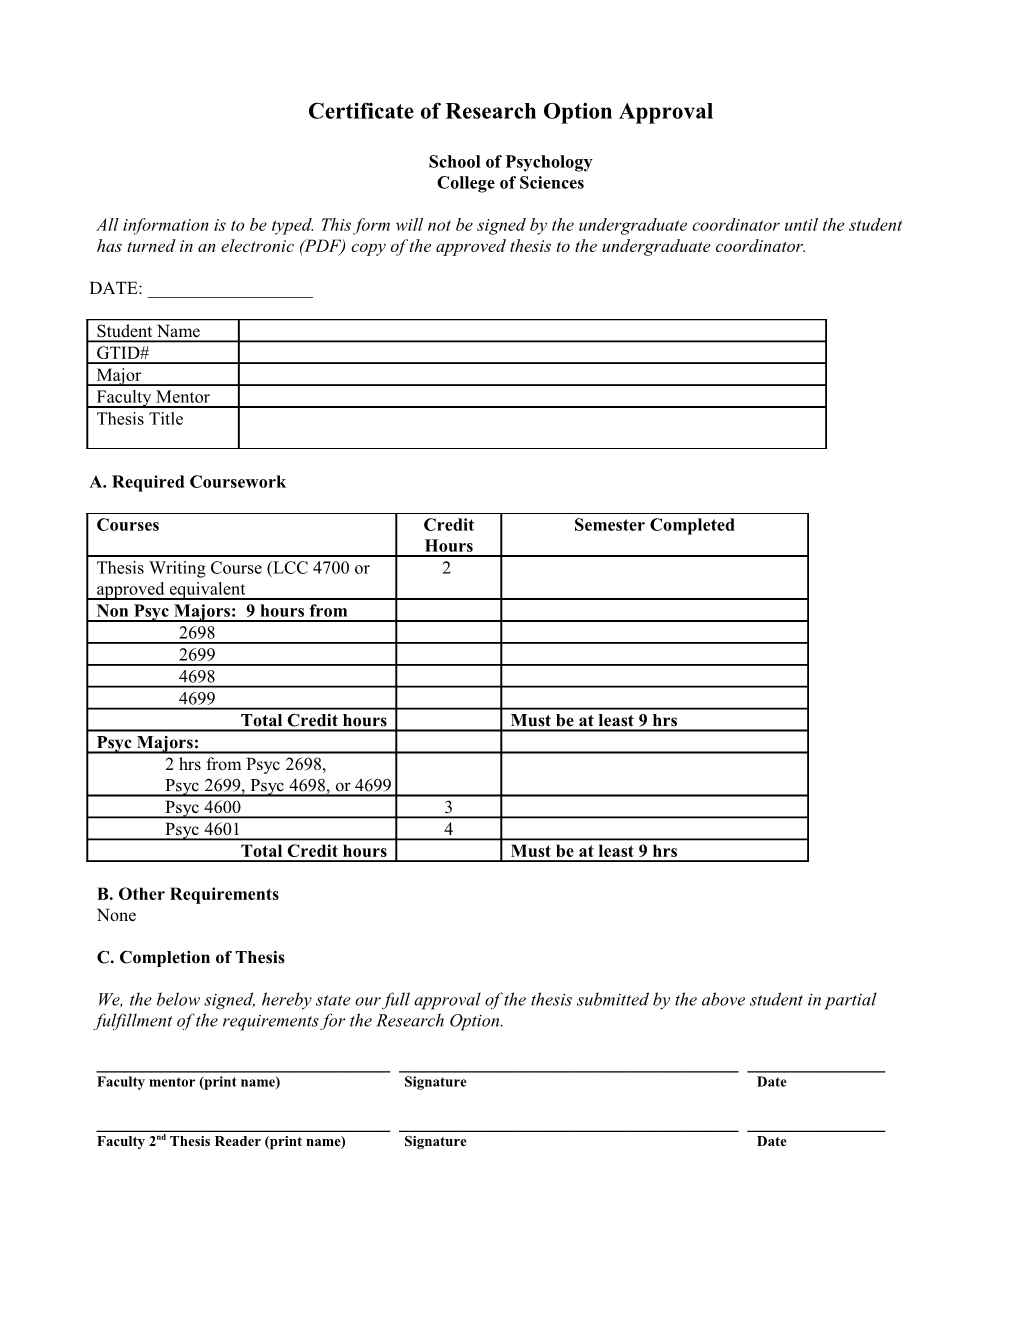 Research Option Approval Form s1